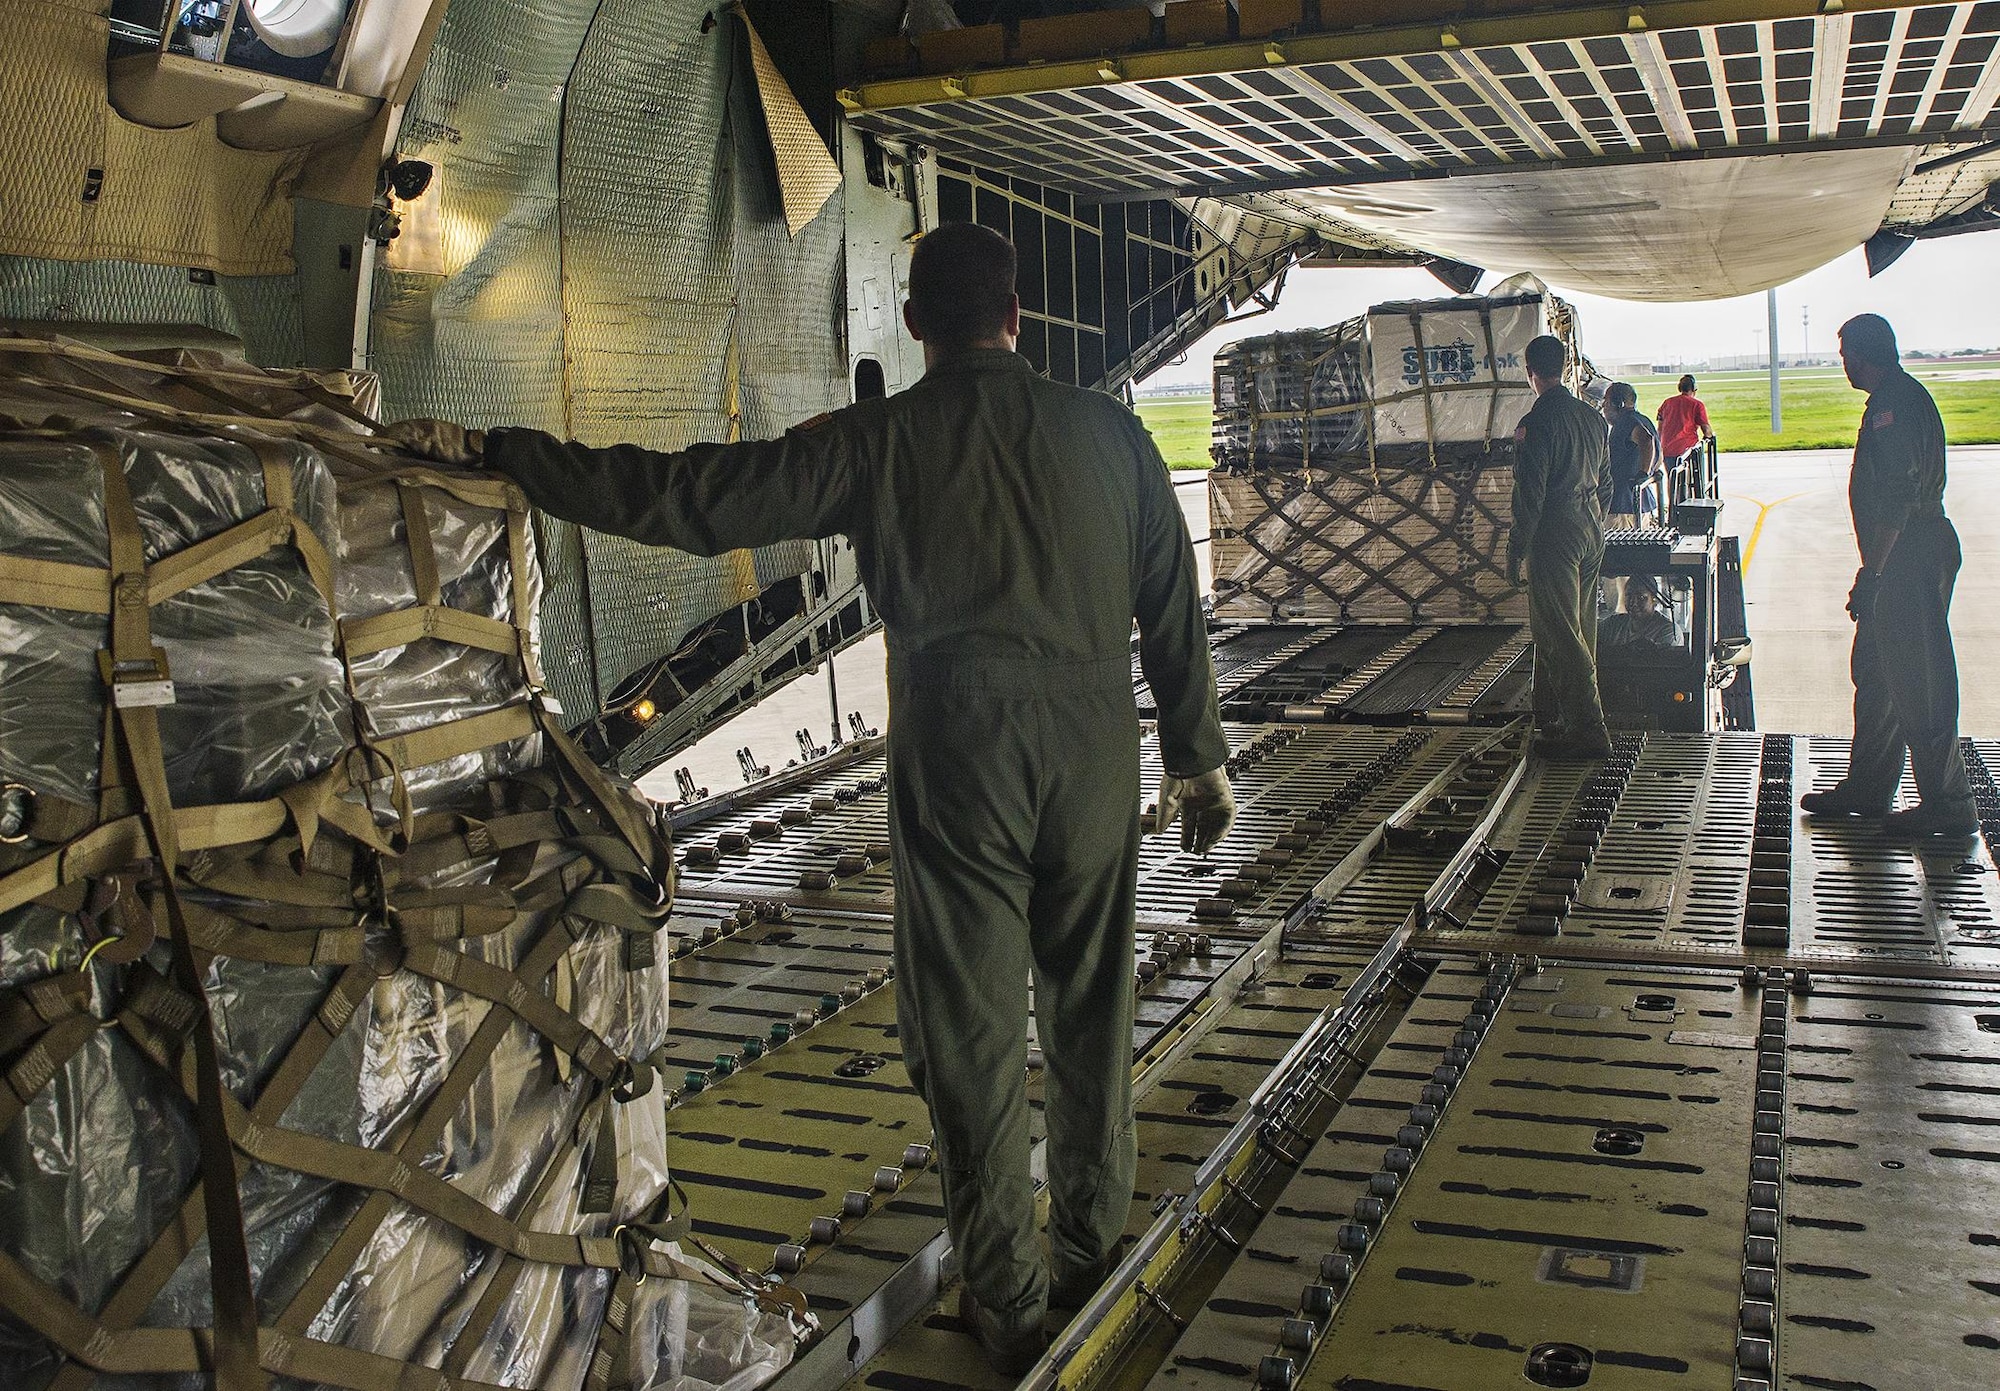 Loadmasters from the 68th Airlift Squadron use a K-Loader to move cargo onto a C-5A Galaxy aircraft Sept. 8, 2016 at Joint Base San Antonio-Lackland, Texas. U.S. Army South’s Headquarters and Headquarters Battalion Soldiers from JBSA-Fort Sam-Houston are taking part in a weeklong emergency deployment exercise at Naval Station Guantanamo Bay, Cuba. (U.S. Air Force photo by Benjamin Faske)